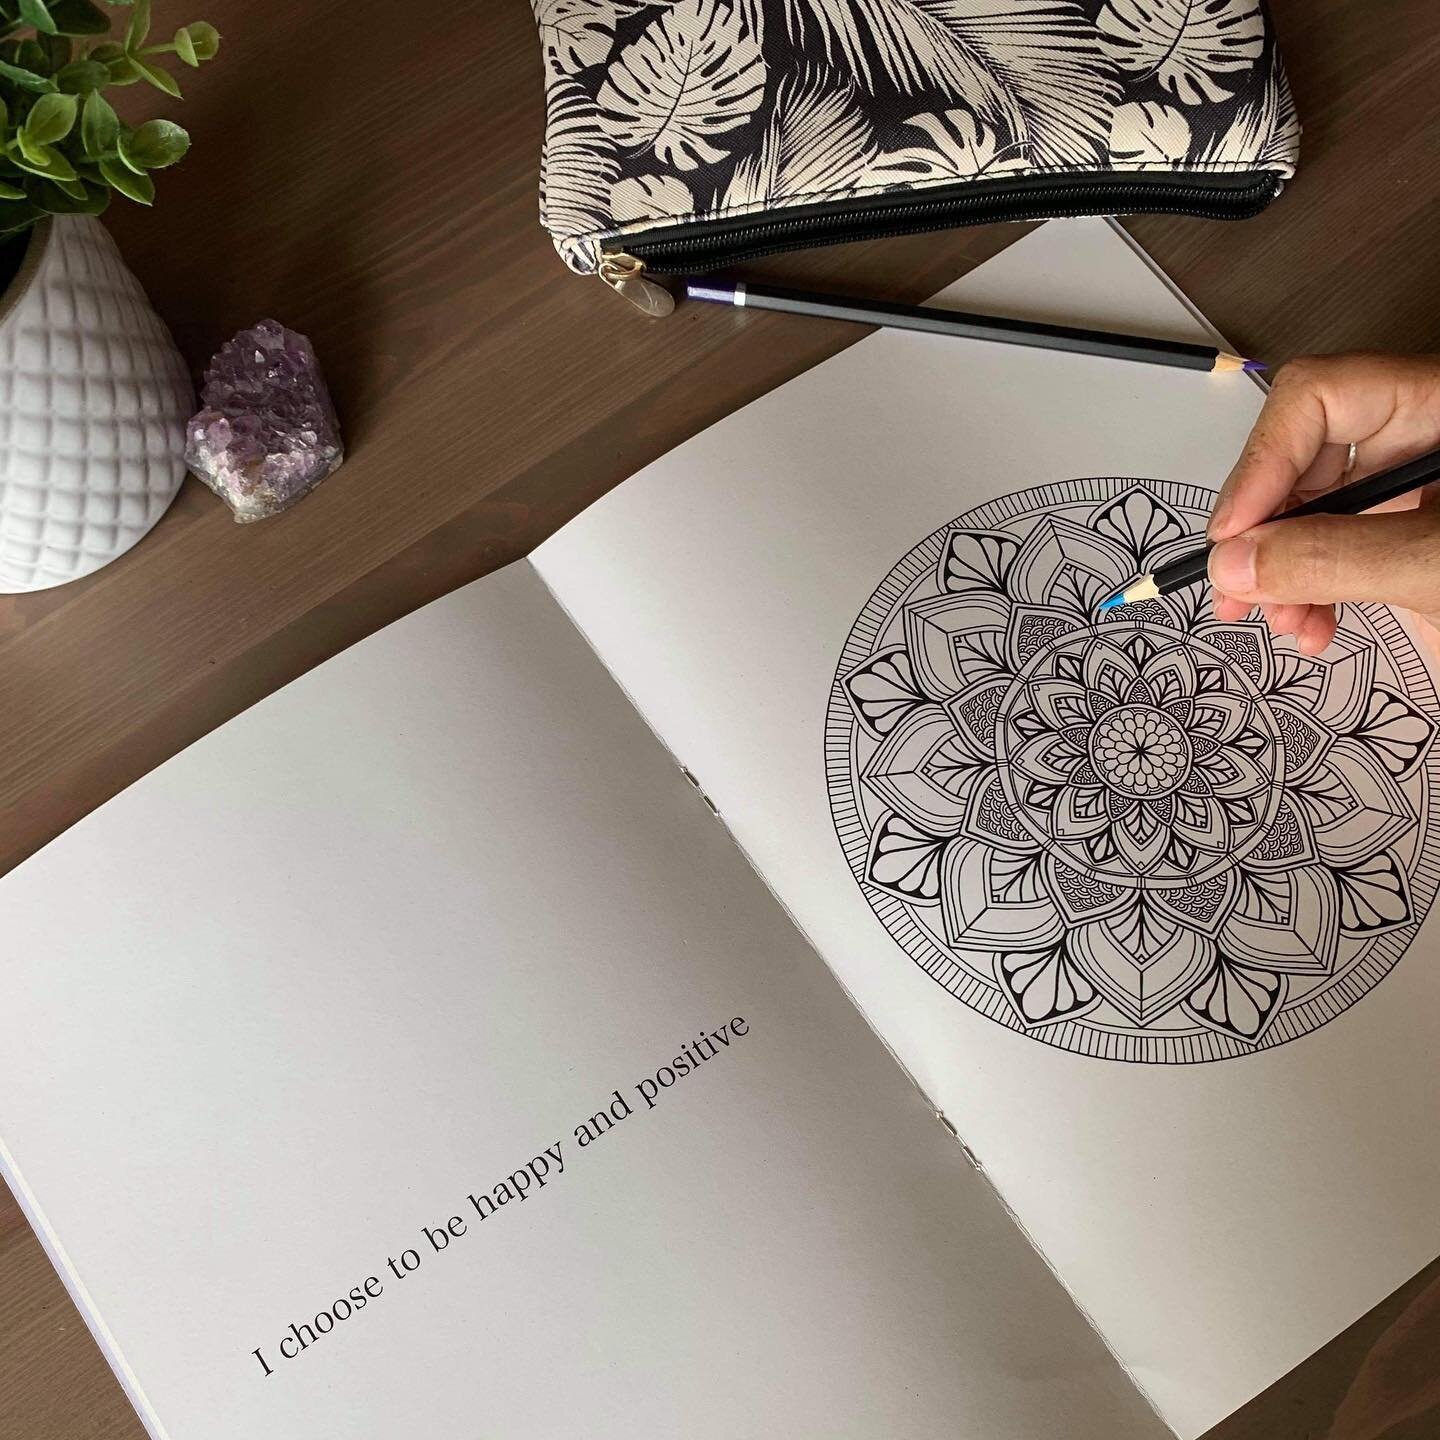 ~ Mandalas for Mums ~ workshops are starting this Wednesday 9am @thesangharoom Cooran. Come and learn how to draw a mandala for meditation and meet other like-minded mums along the way. Bring your kids, I will have my boy there too. Let&rsquo;s build